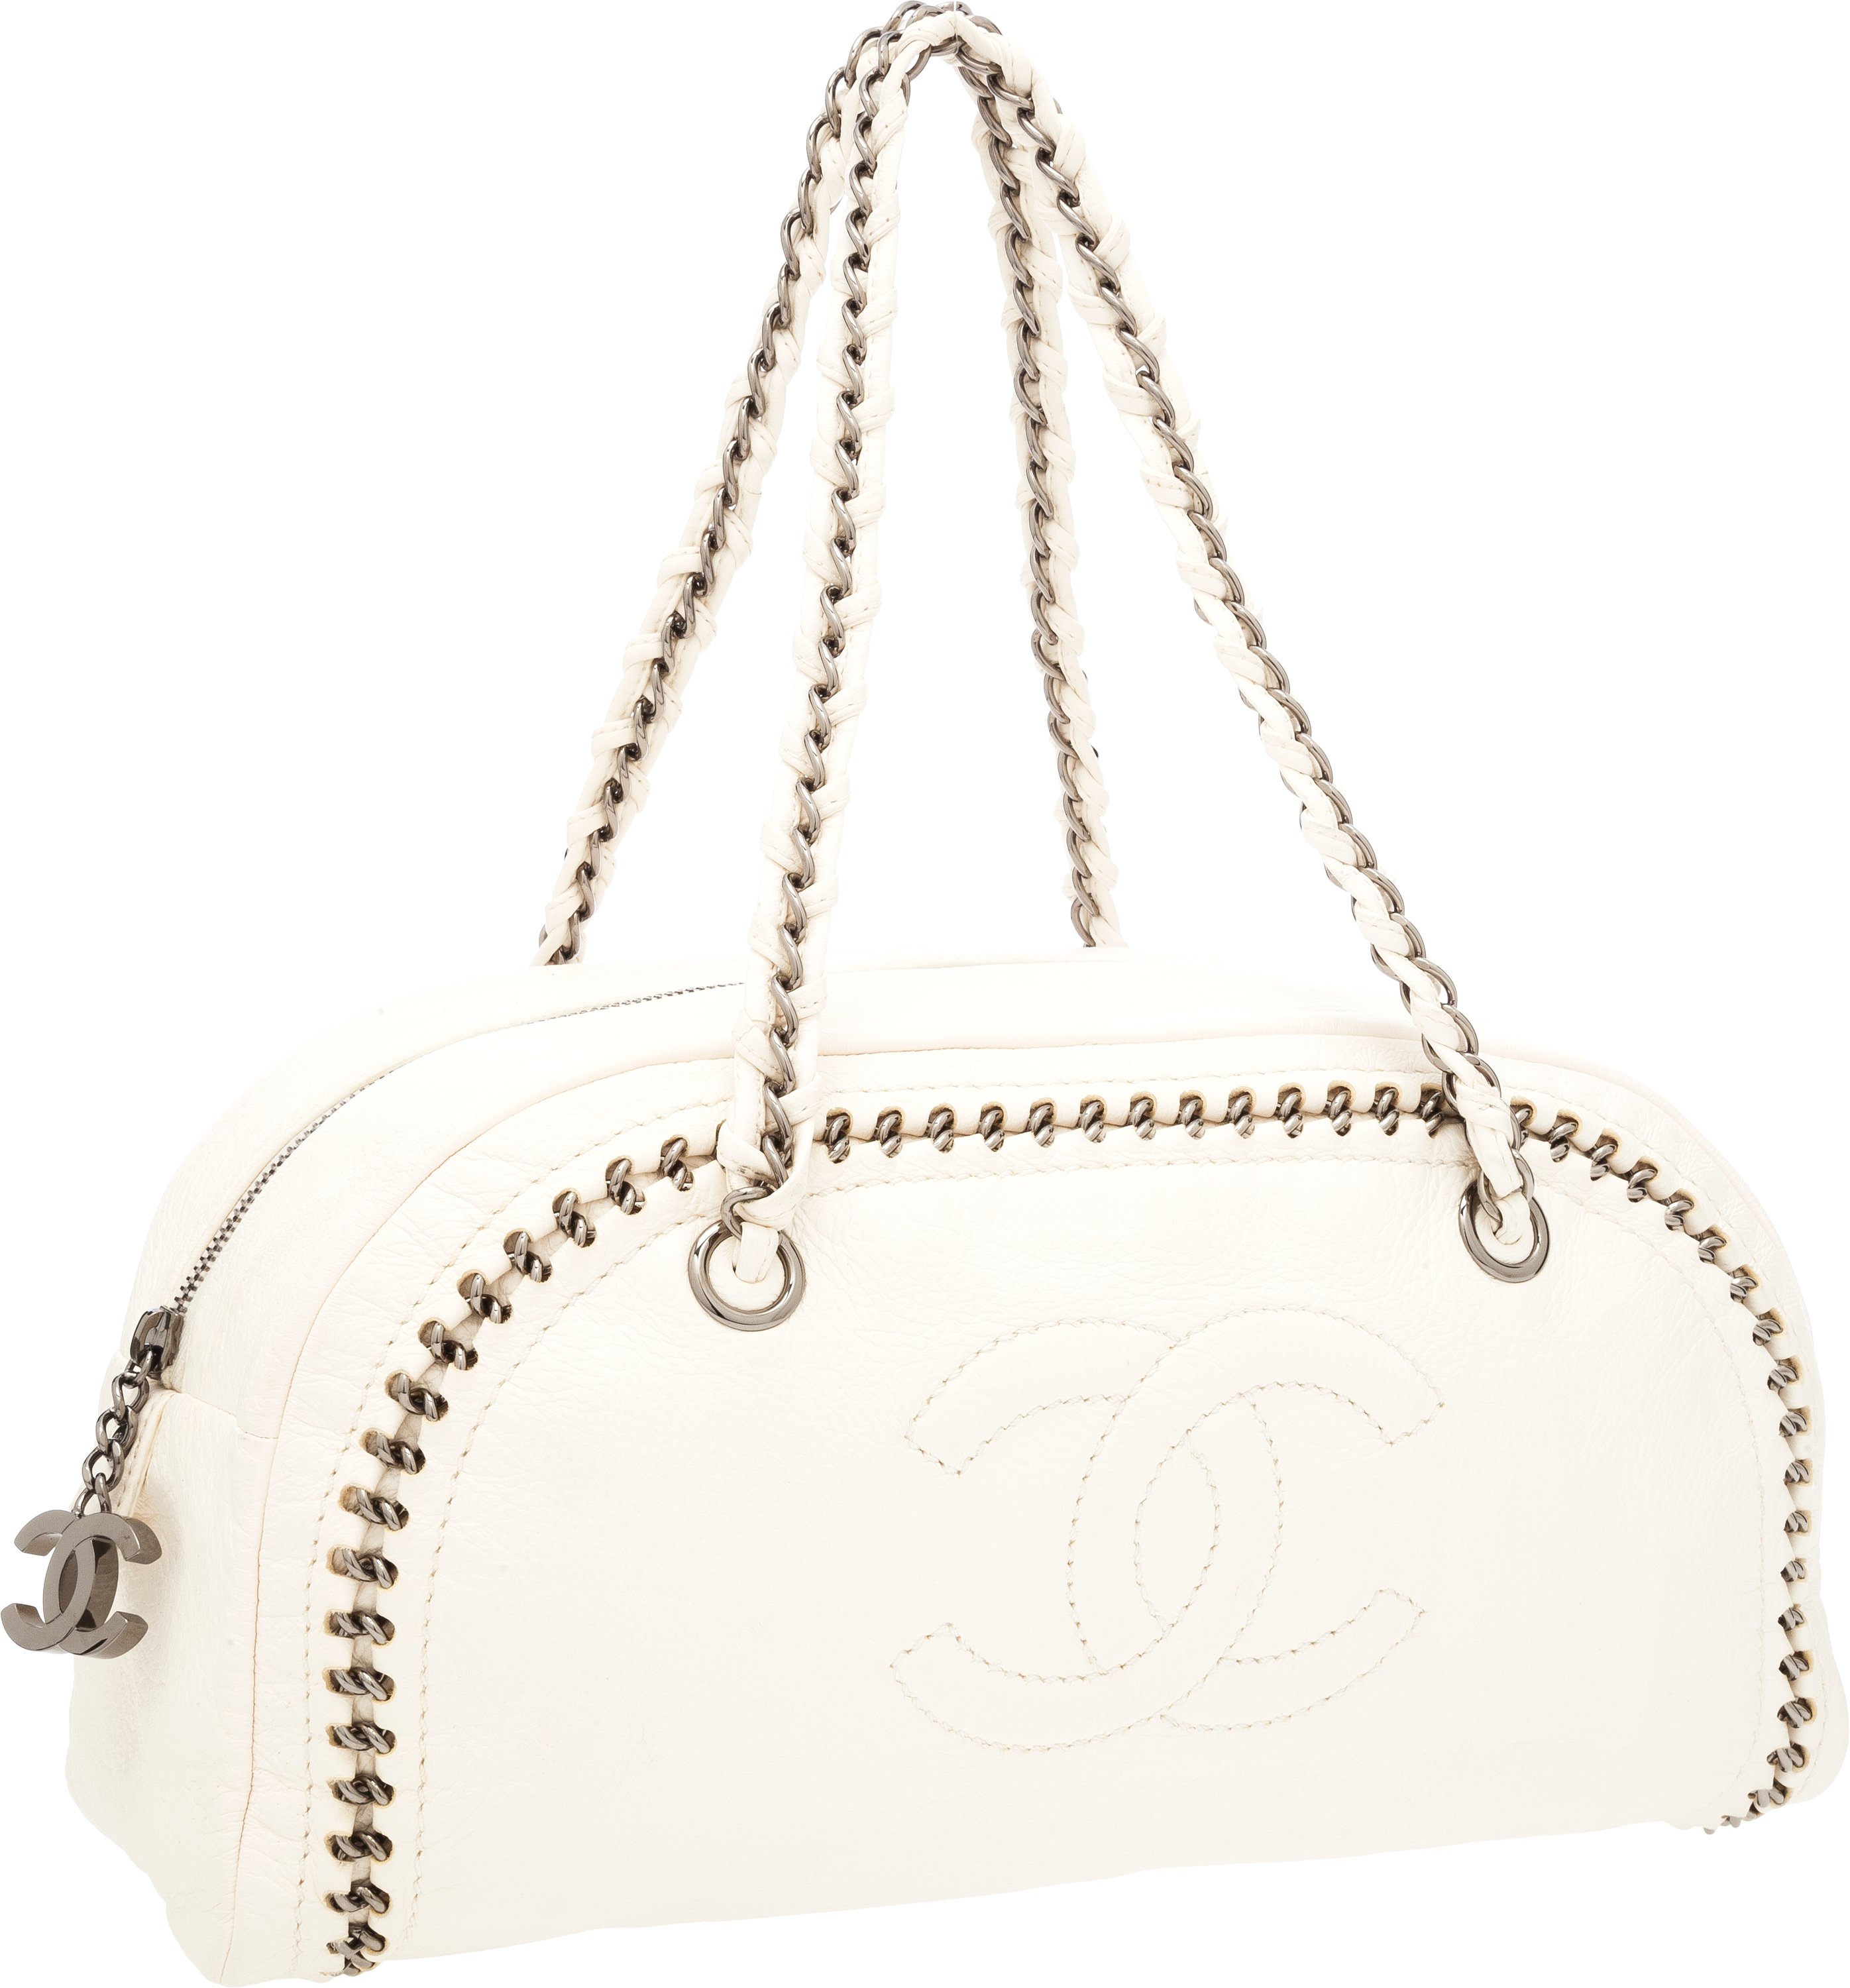 Chanel White Leather Modern Chain Bowling Bag with Gunmetal, Lot #56227